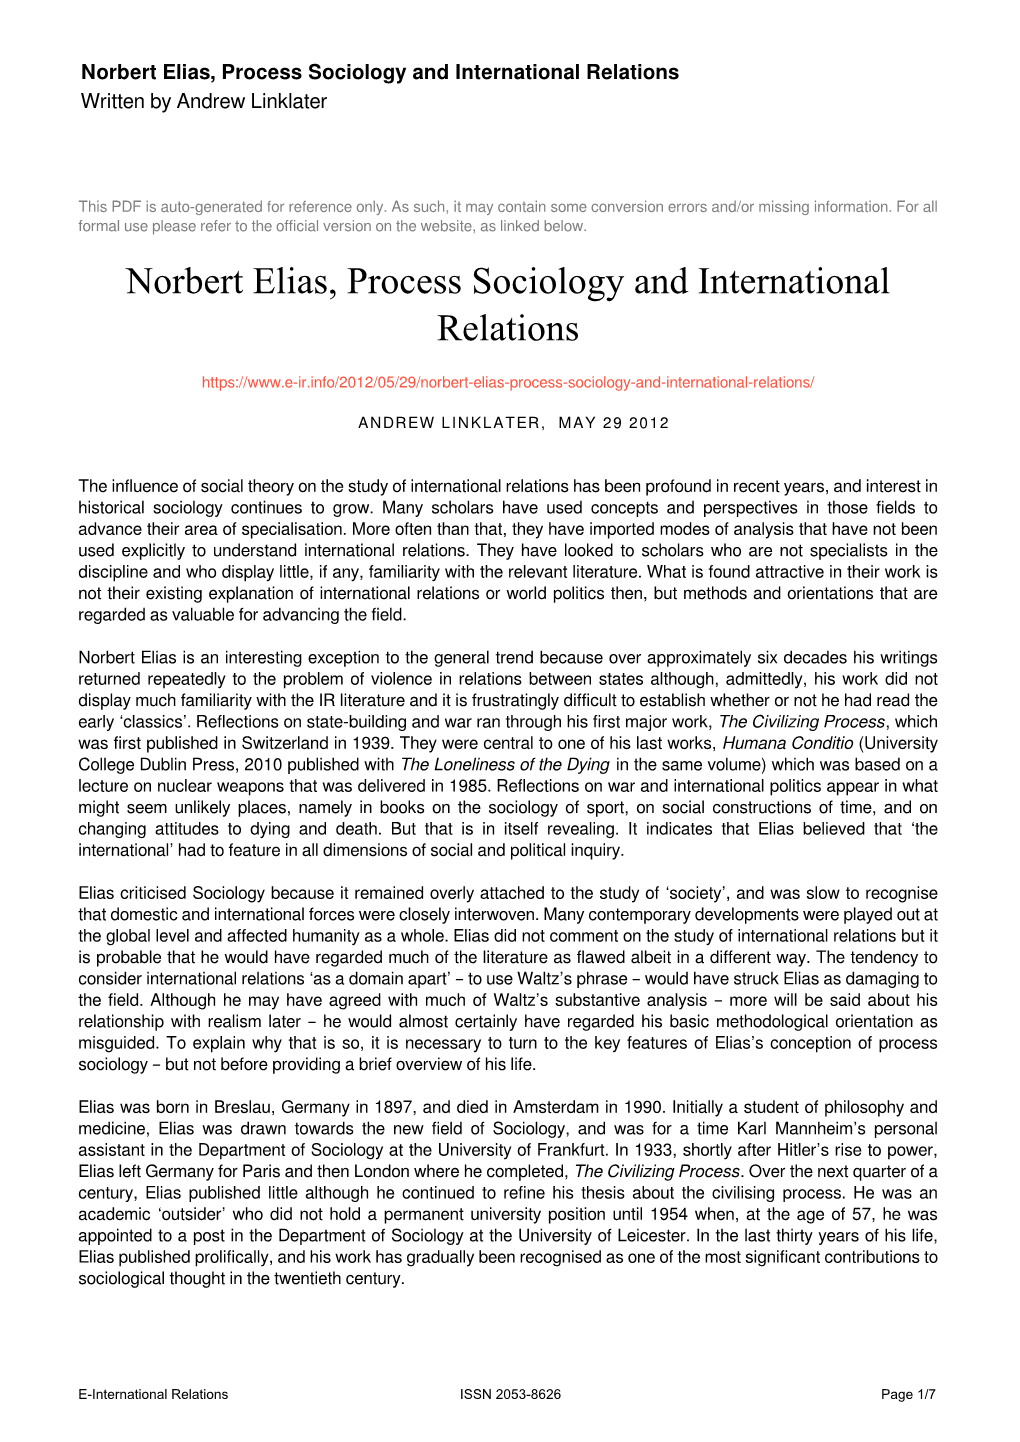 Norbert Elias, Process Sociology and International Relations Written by Andrew Linklater